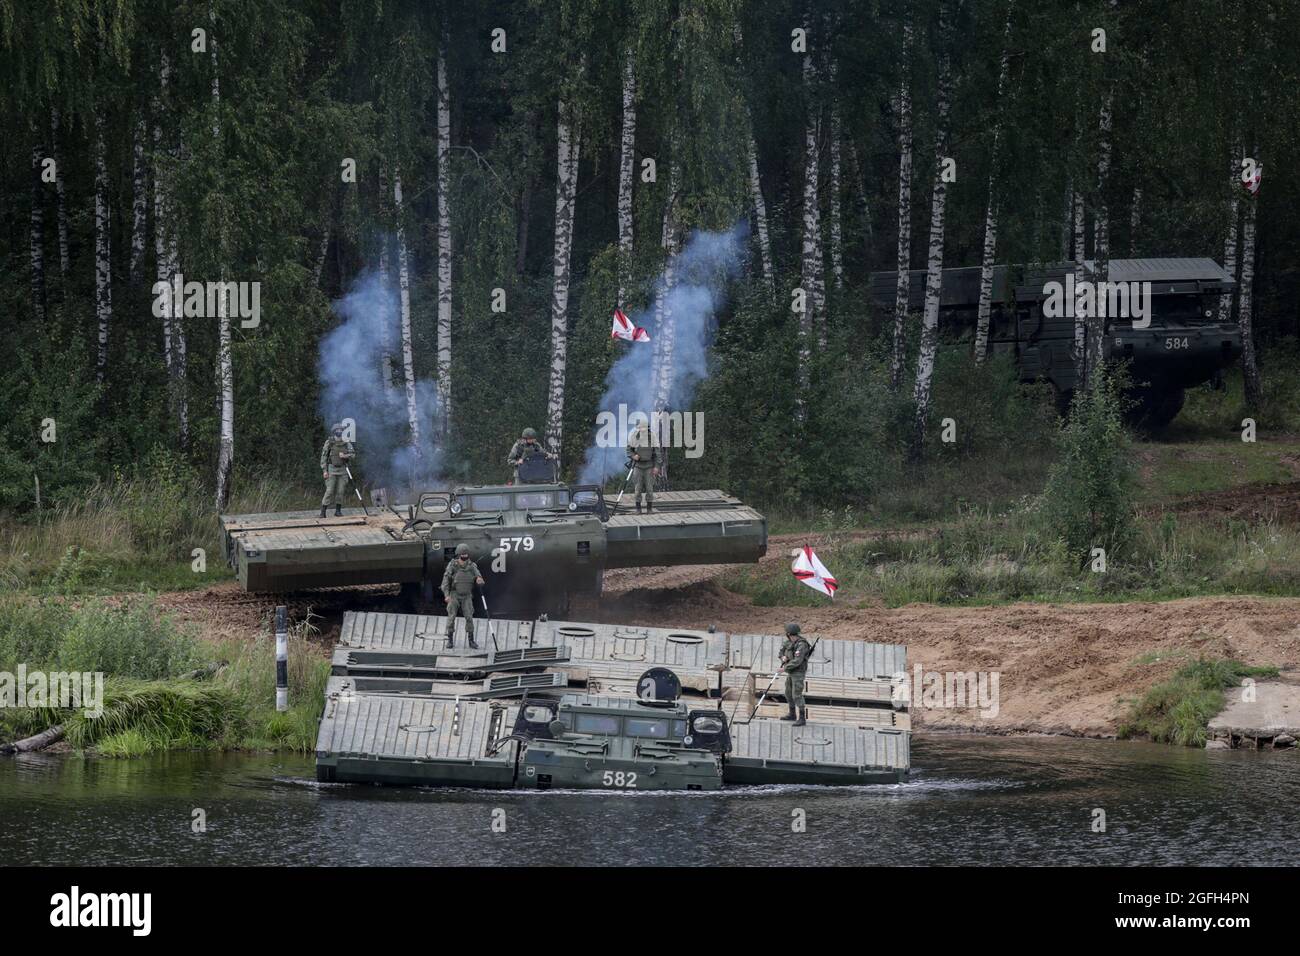 Moscow, Russia. 24th Aug, 2021. Russian Army engineers set the PMM-2M pontoon floating bridge during the annual Army Games defense technology international exhibition. The International Army Games is an annual Russian military sports event organized by the Ministry of Defense of Russia. The event, which was first staged in August 2015, involves close to 30 countries taking part in dozens of competitions over two weeks to prove which is the most skilled. Dynamic demonstration is a part of the Army Games public display Credit: SOPA Images Limited/Alamy Live News Stock Photo